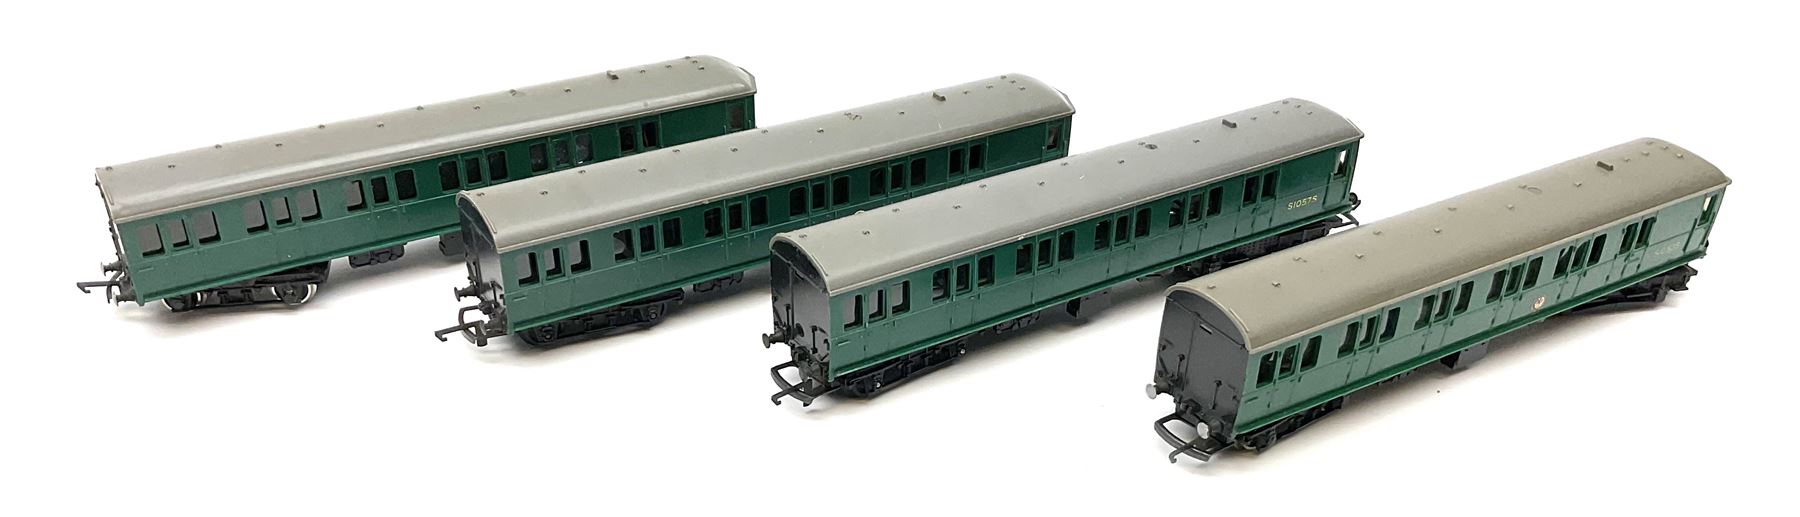 Tri-ang '00' gauge - two Class 4-Sub EMU two-car sets S1057S/S1052S; Steeple Cab Electric 0-4-0 loco - Image 2 of 7